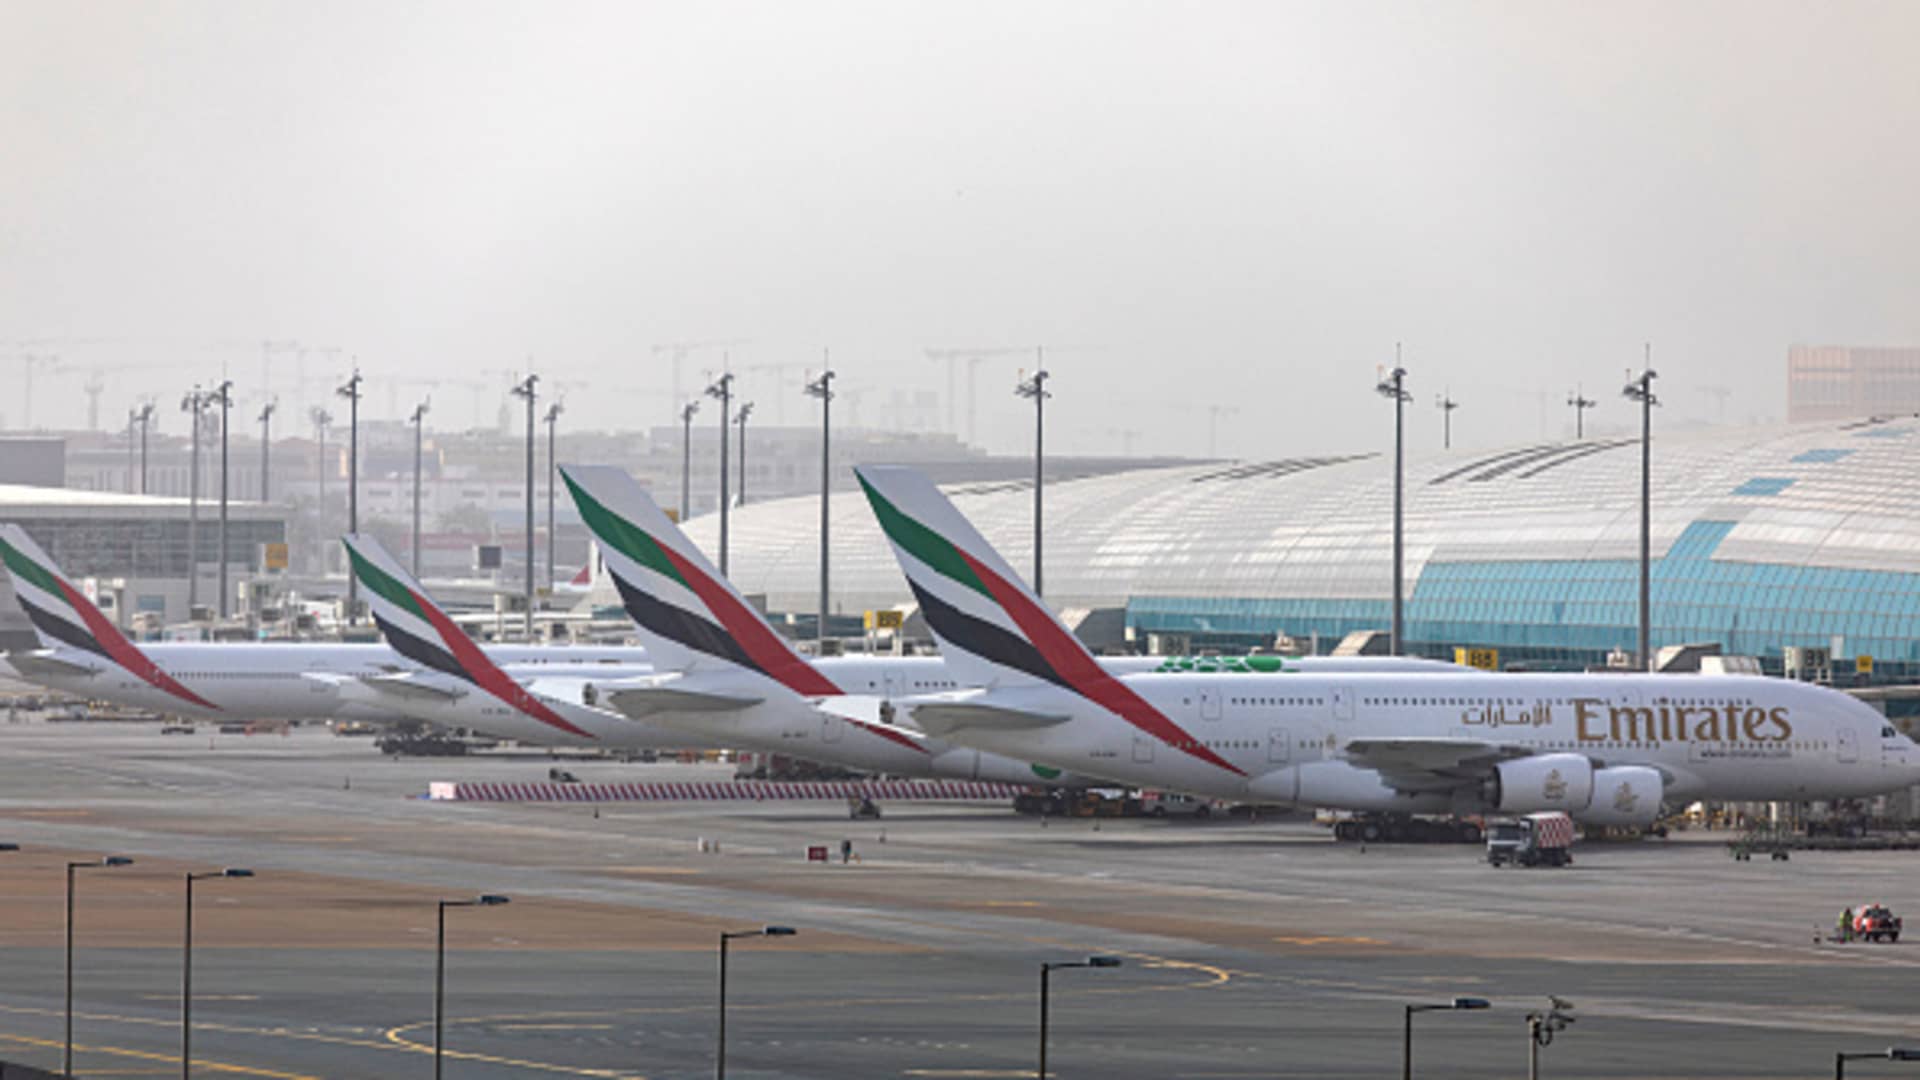 Emirates airline, stung by soaring fuel prices, posts $1.1 billion dollar loss